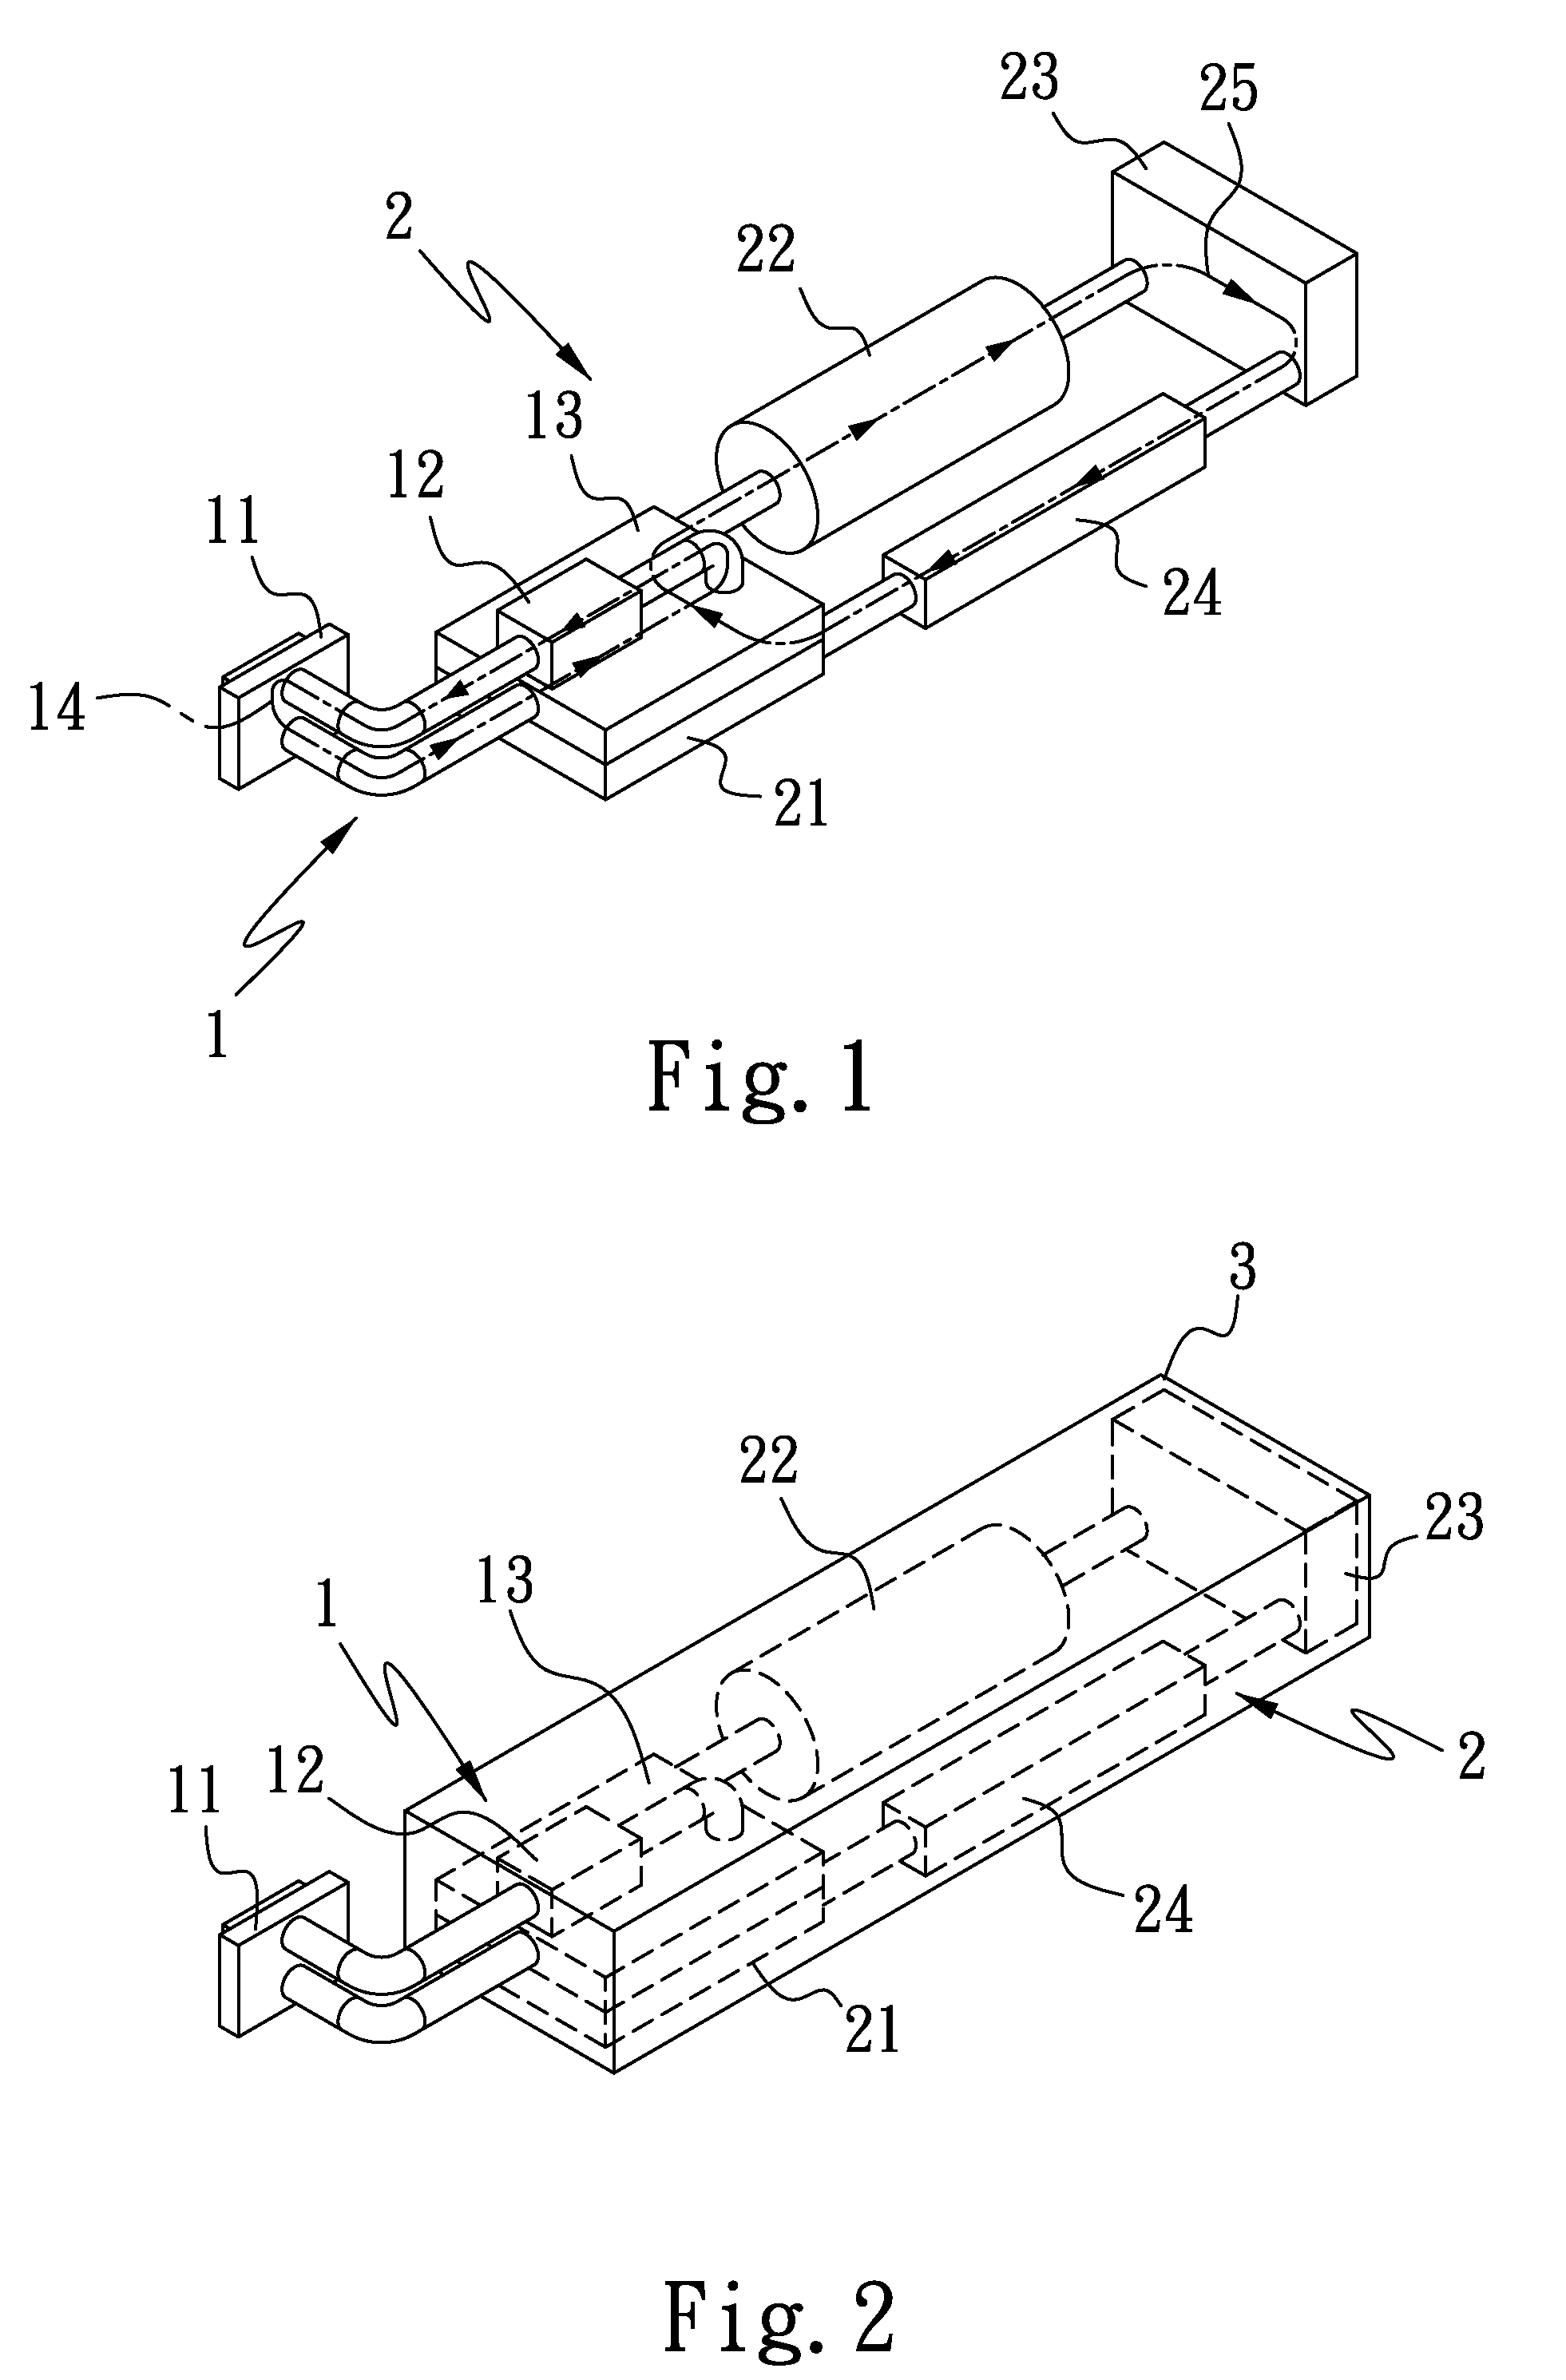 Computer cooling apparatus